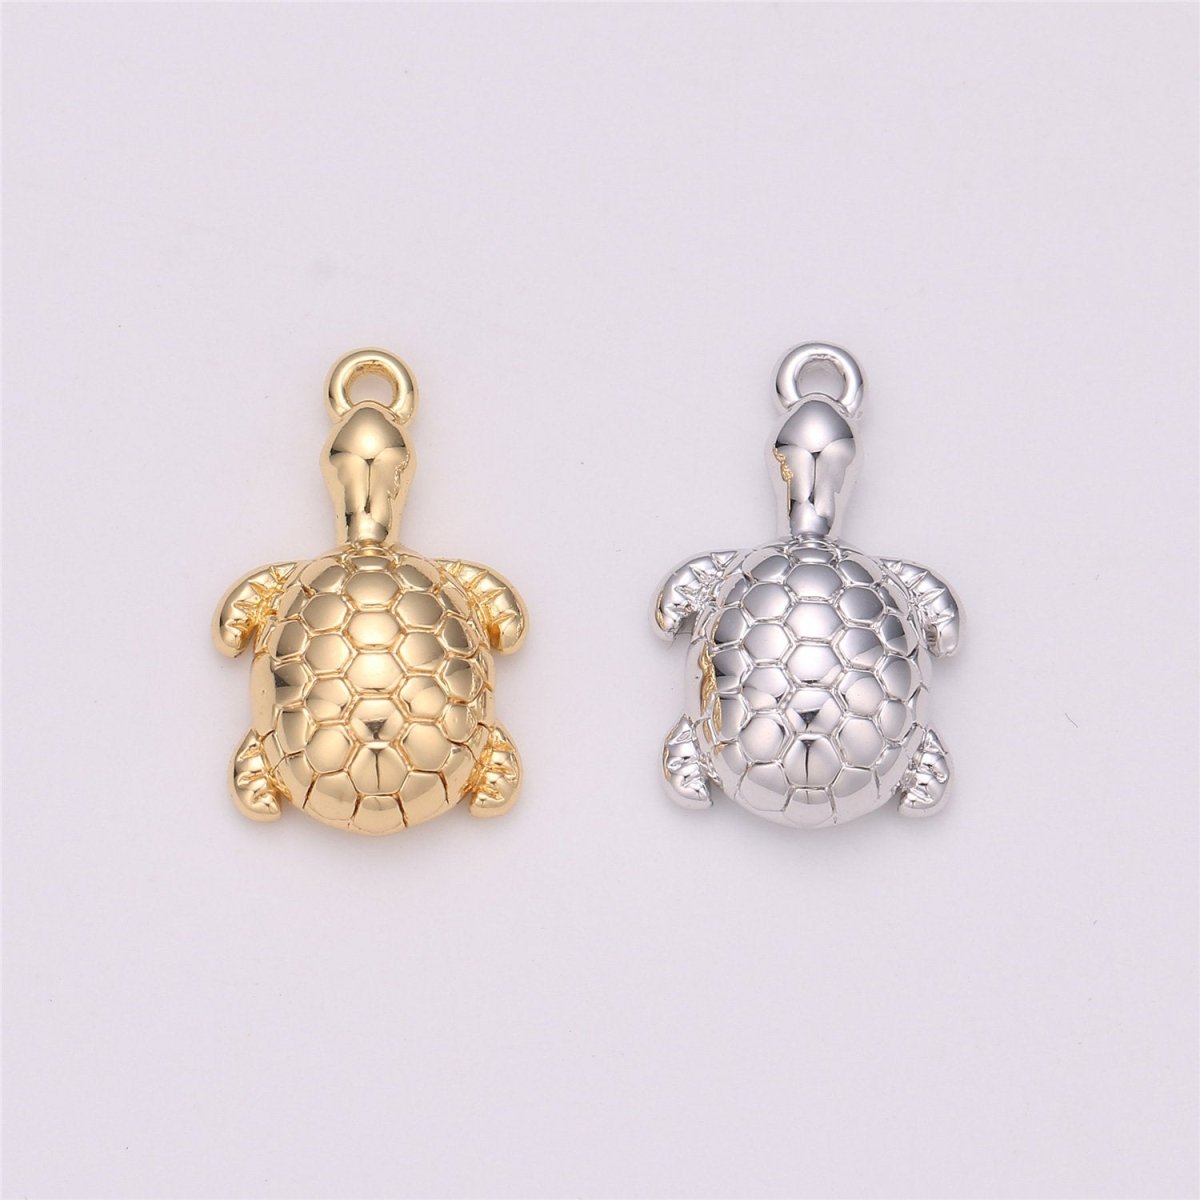 Small Sea Turtle Charm Ocean Summer Vacation Animal Pendant in Gold Filled Turtoise Pendants Necklace Earring Bracelet Charms C-531 - DLUXCA